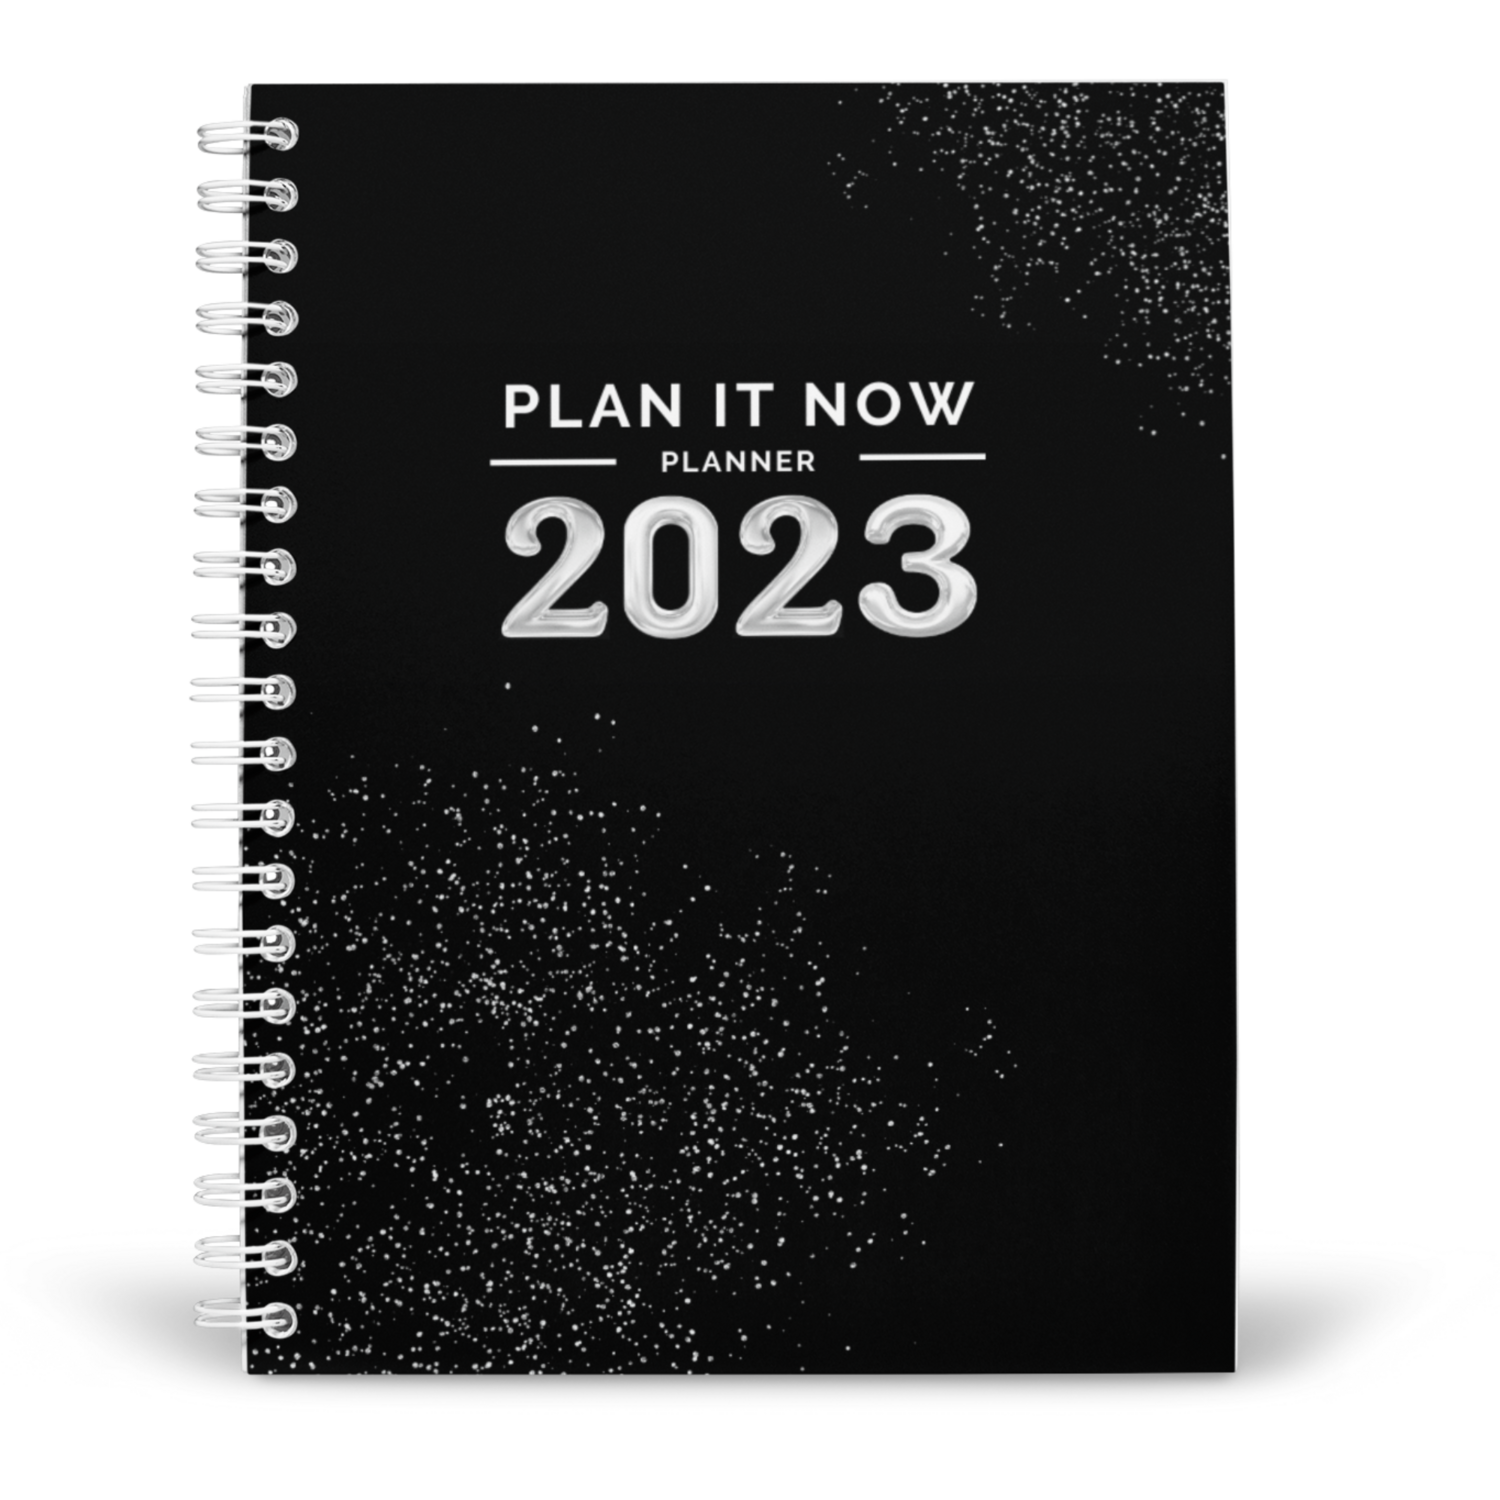 2023 PLAN IT NOW BUSINESS PLANNER